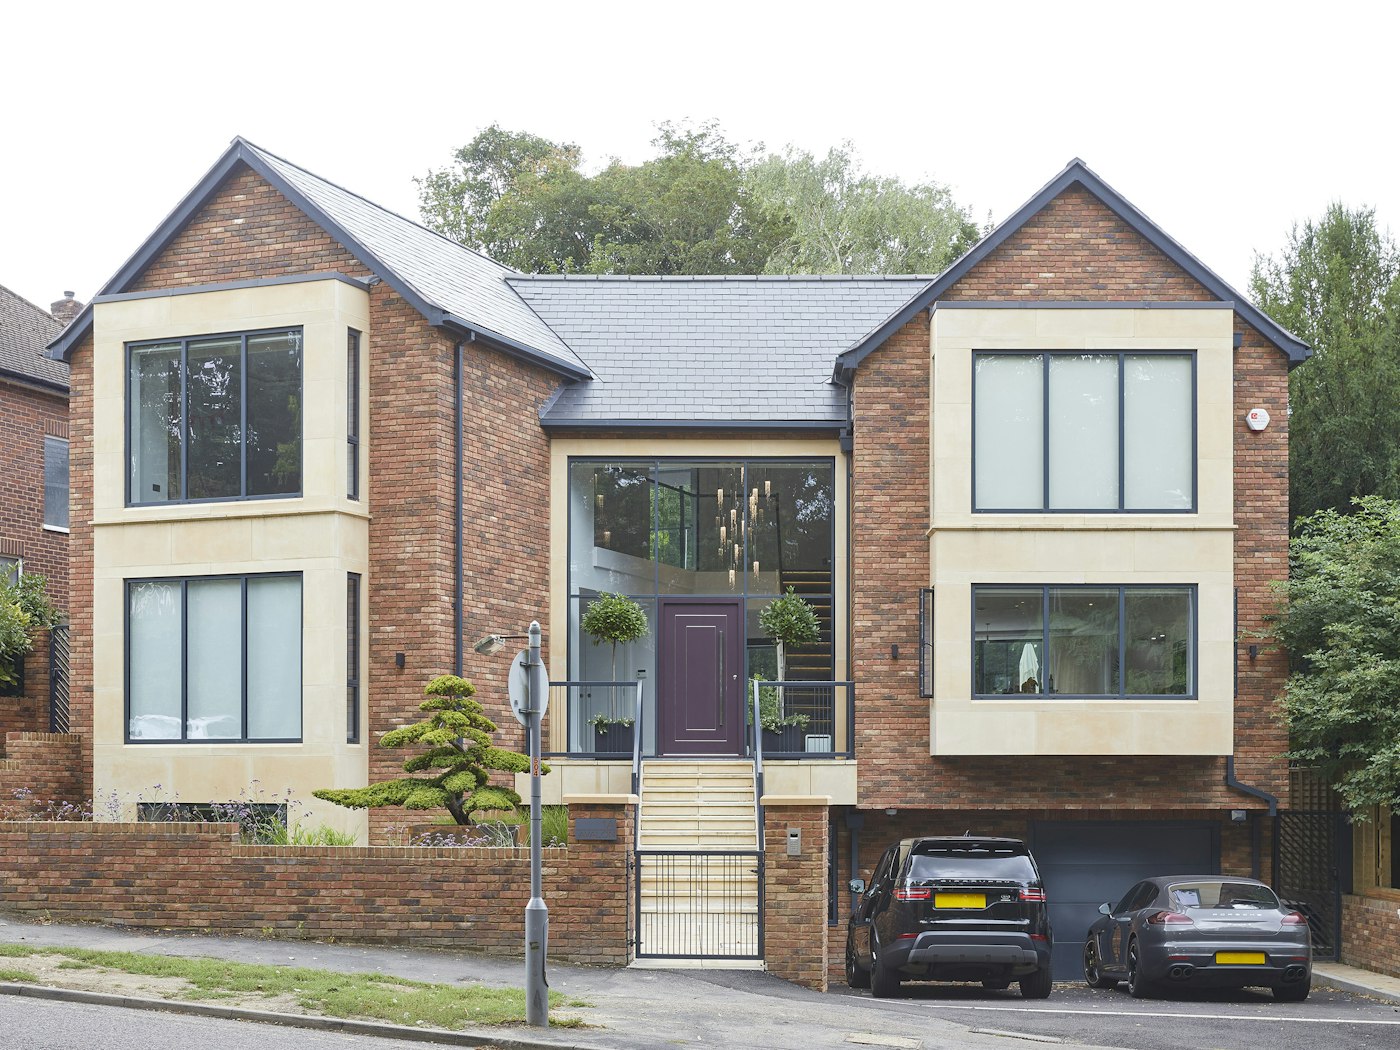 Keeping it simple - but unique - this mixed style modern house offsets the more traditional red brick with a wealth of glass and our Form door in purple for a contemporary upgrade